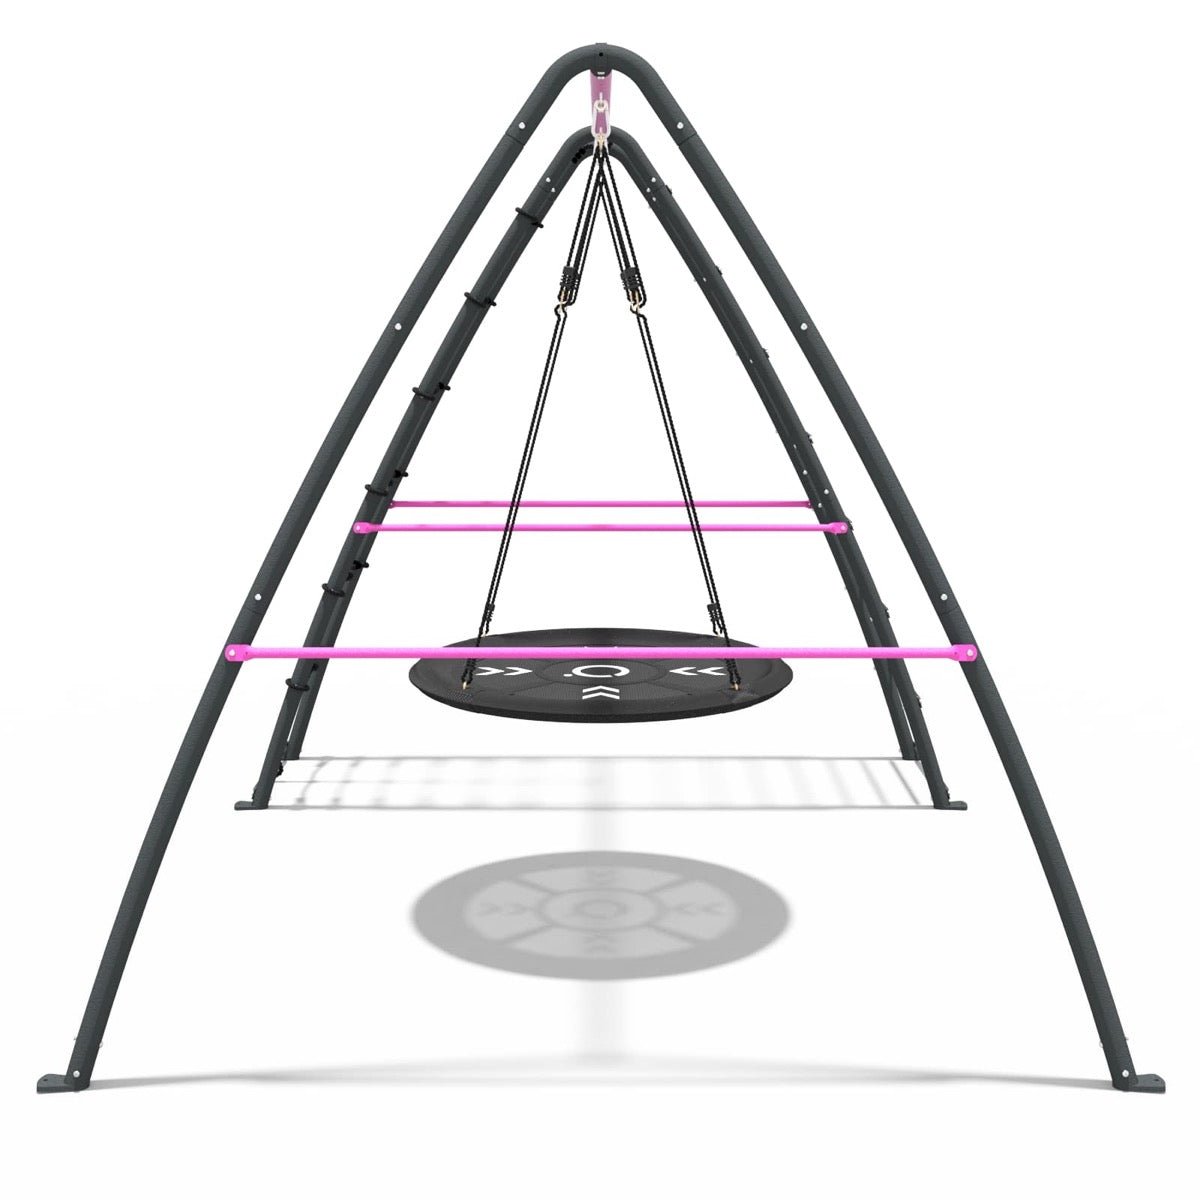 Rebo Steel Series Metal Swing Set with Up and Over wall - Nest Swing Pink